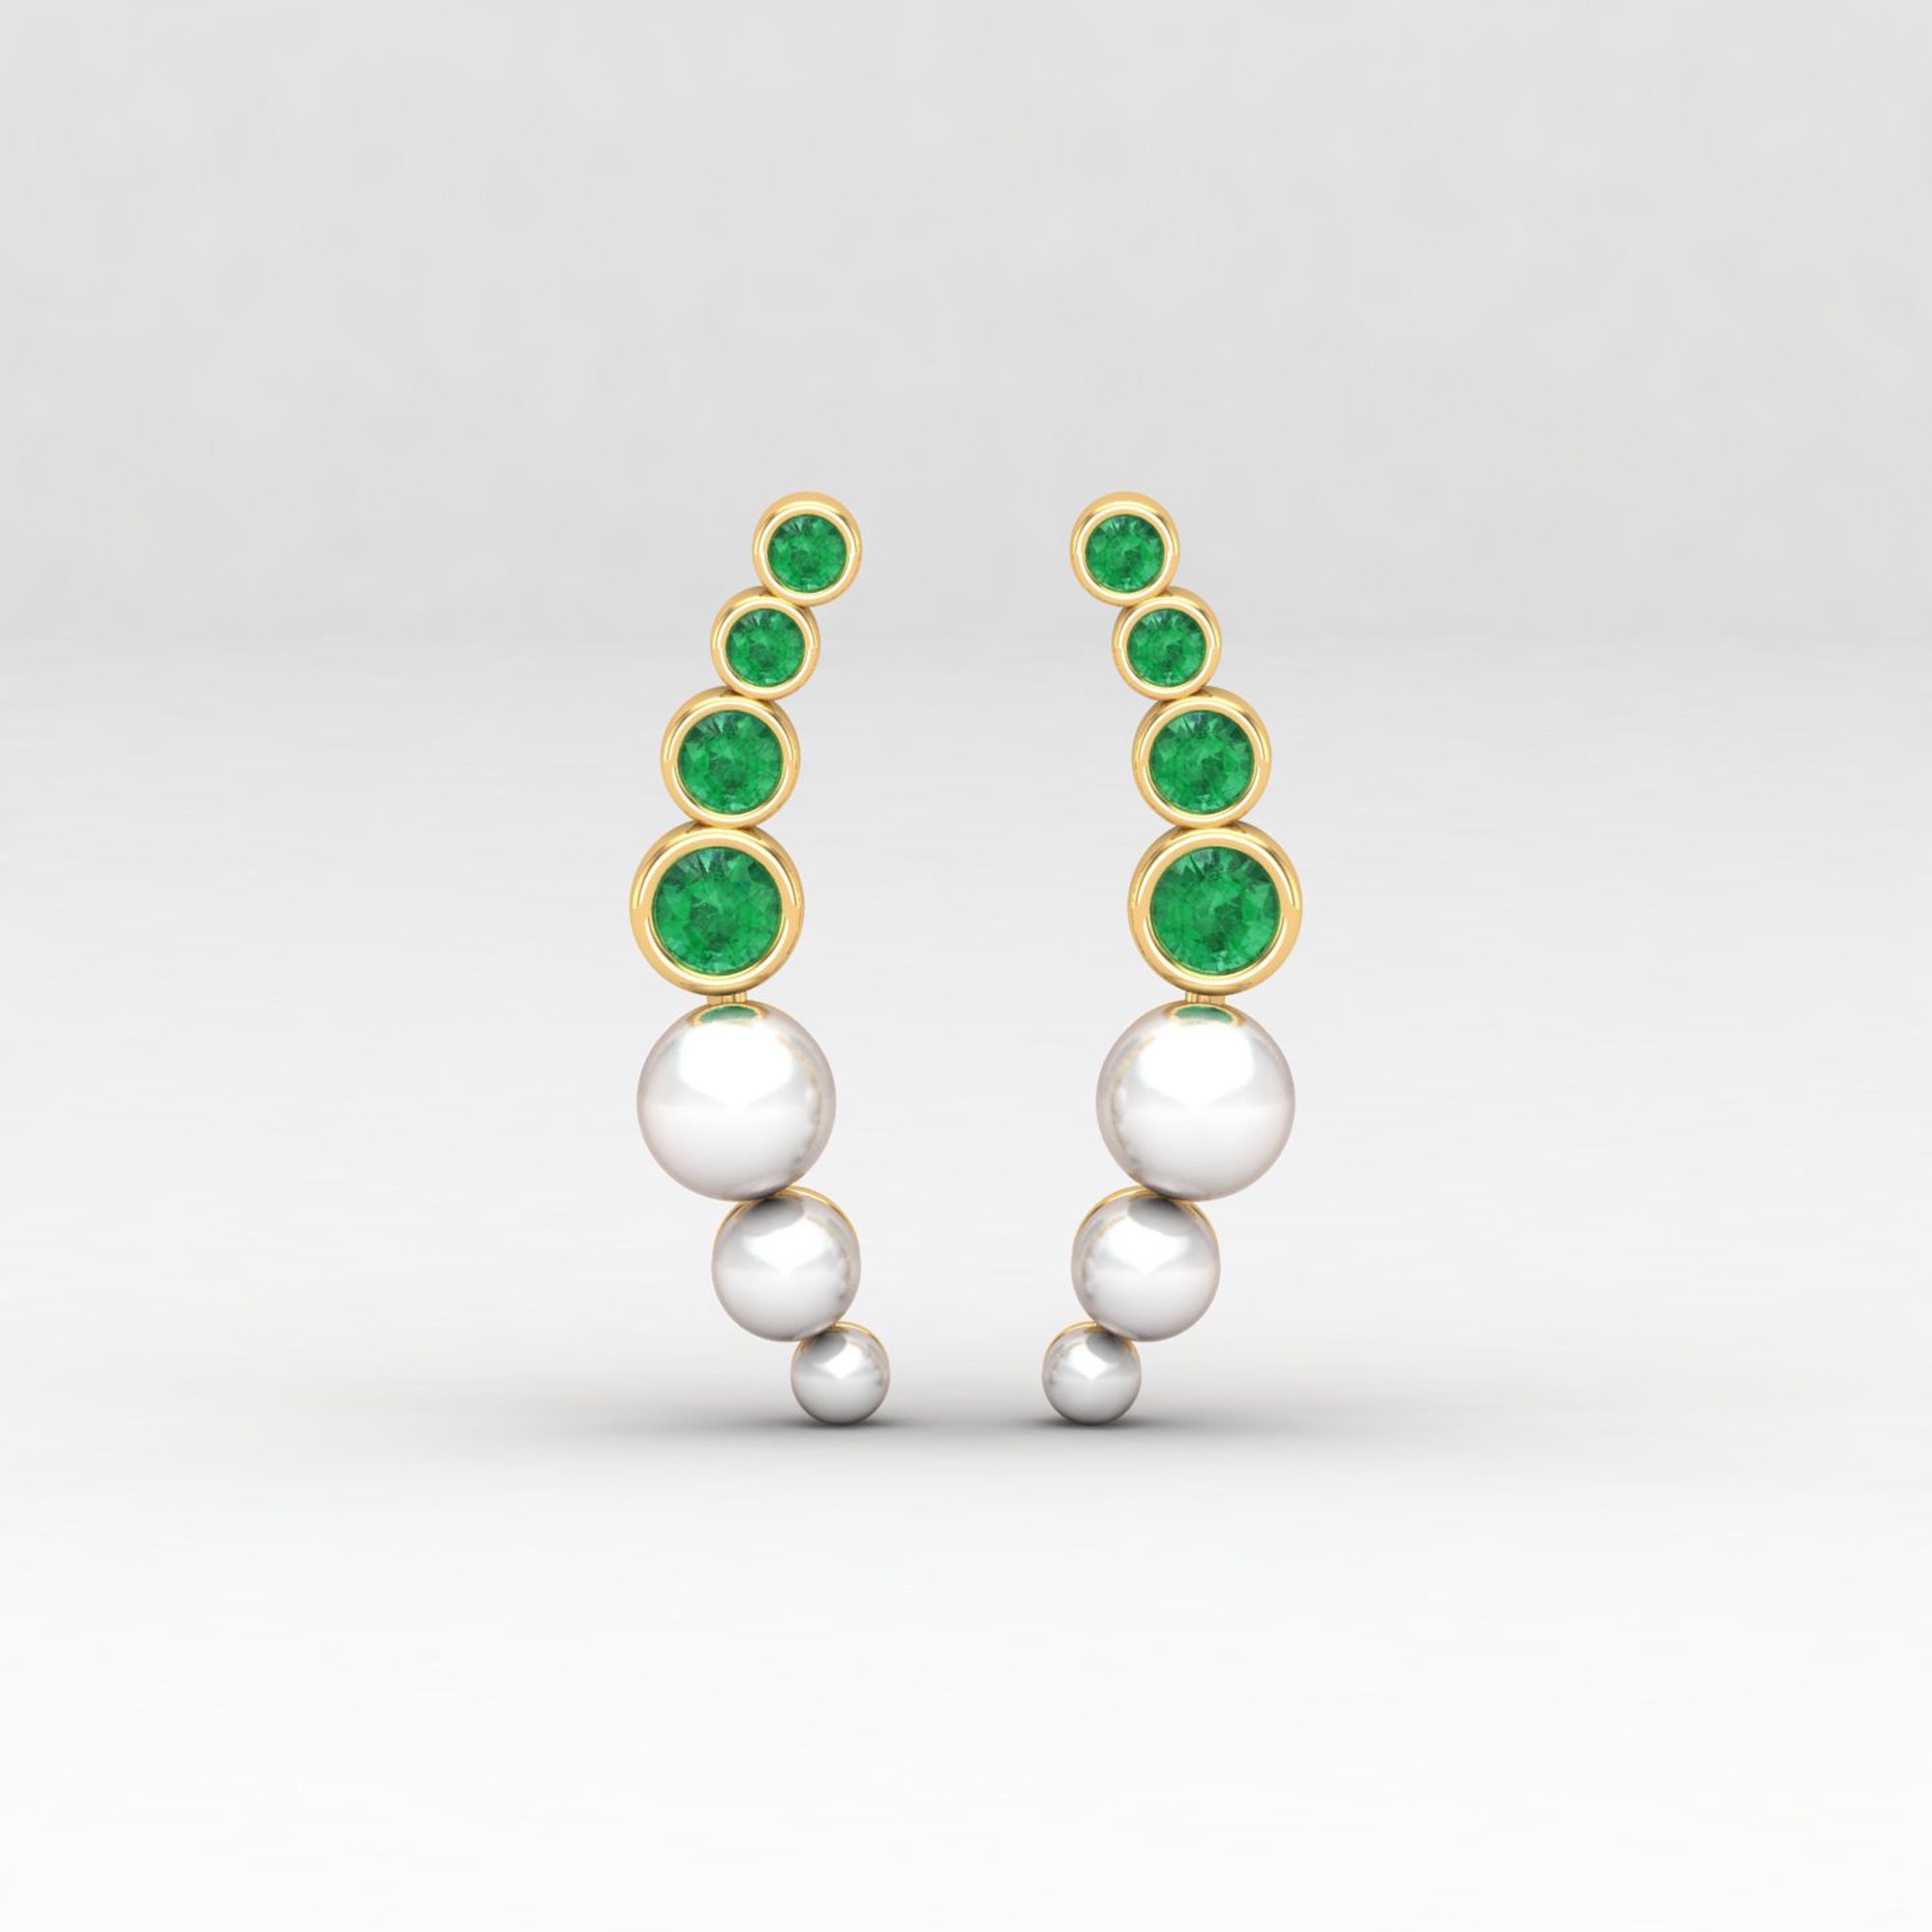 Emerald Cartilage Earrings, Pearl Helix Piercing, 14K Curved Earring, Genuine Climber Gift For Her